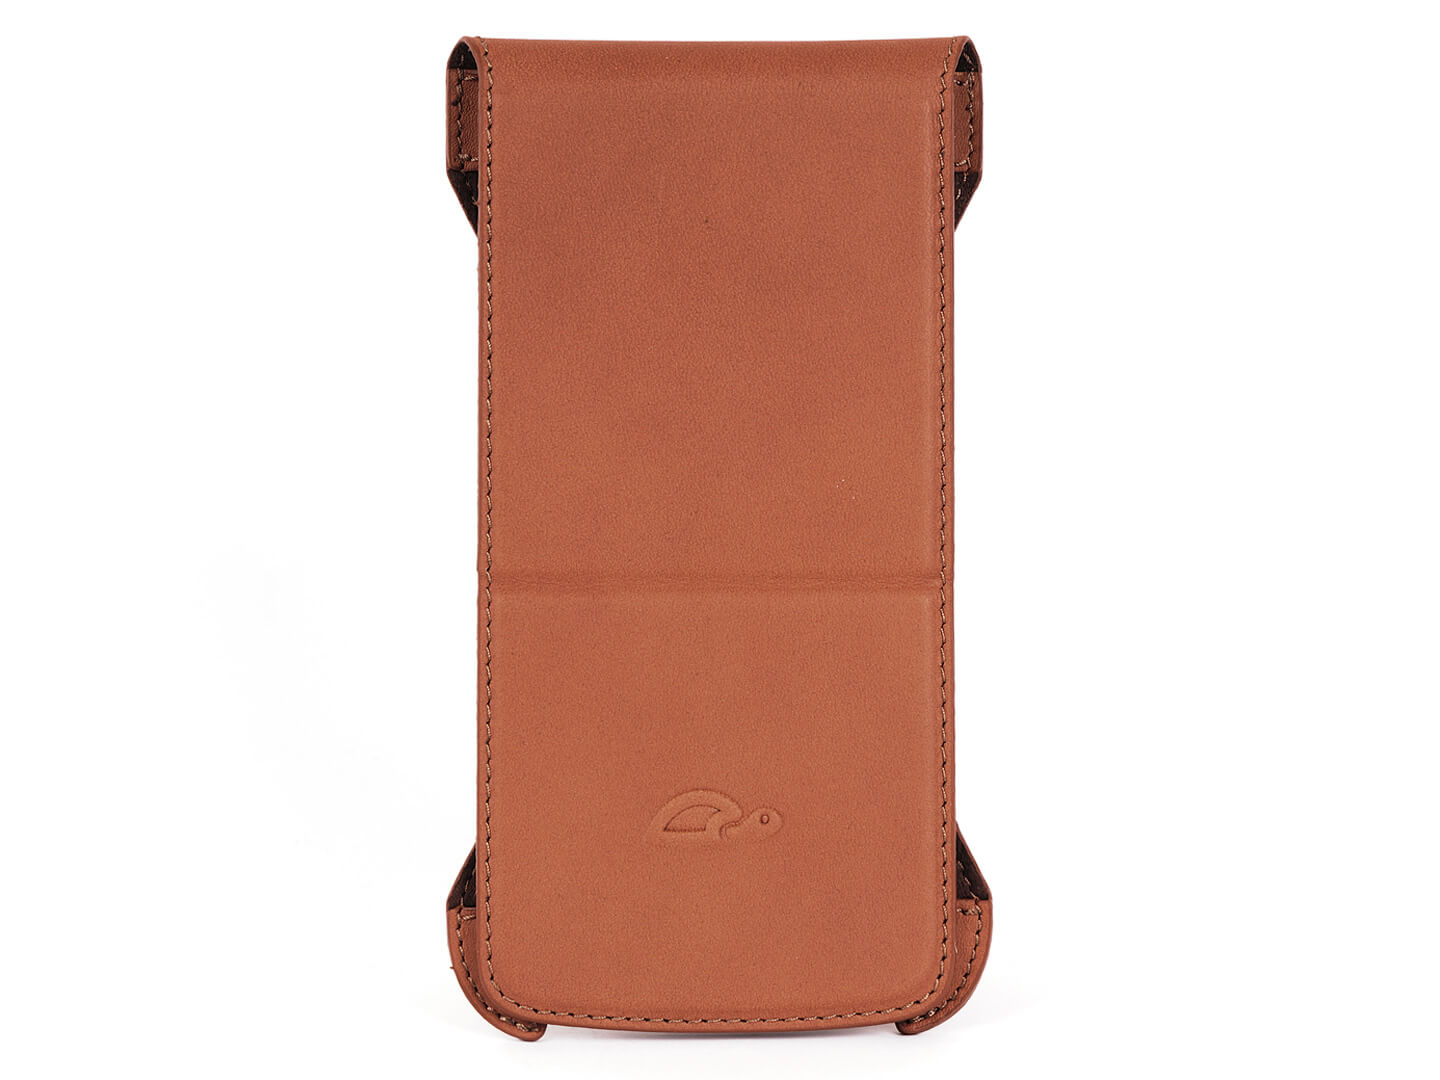 Flip Case iPhone 6 / 6 Plus - Vegtan Leather - Stand Function - Card Slot - perspective - tan - Carapaz